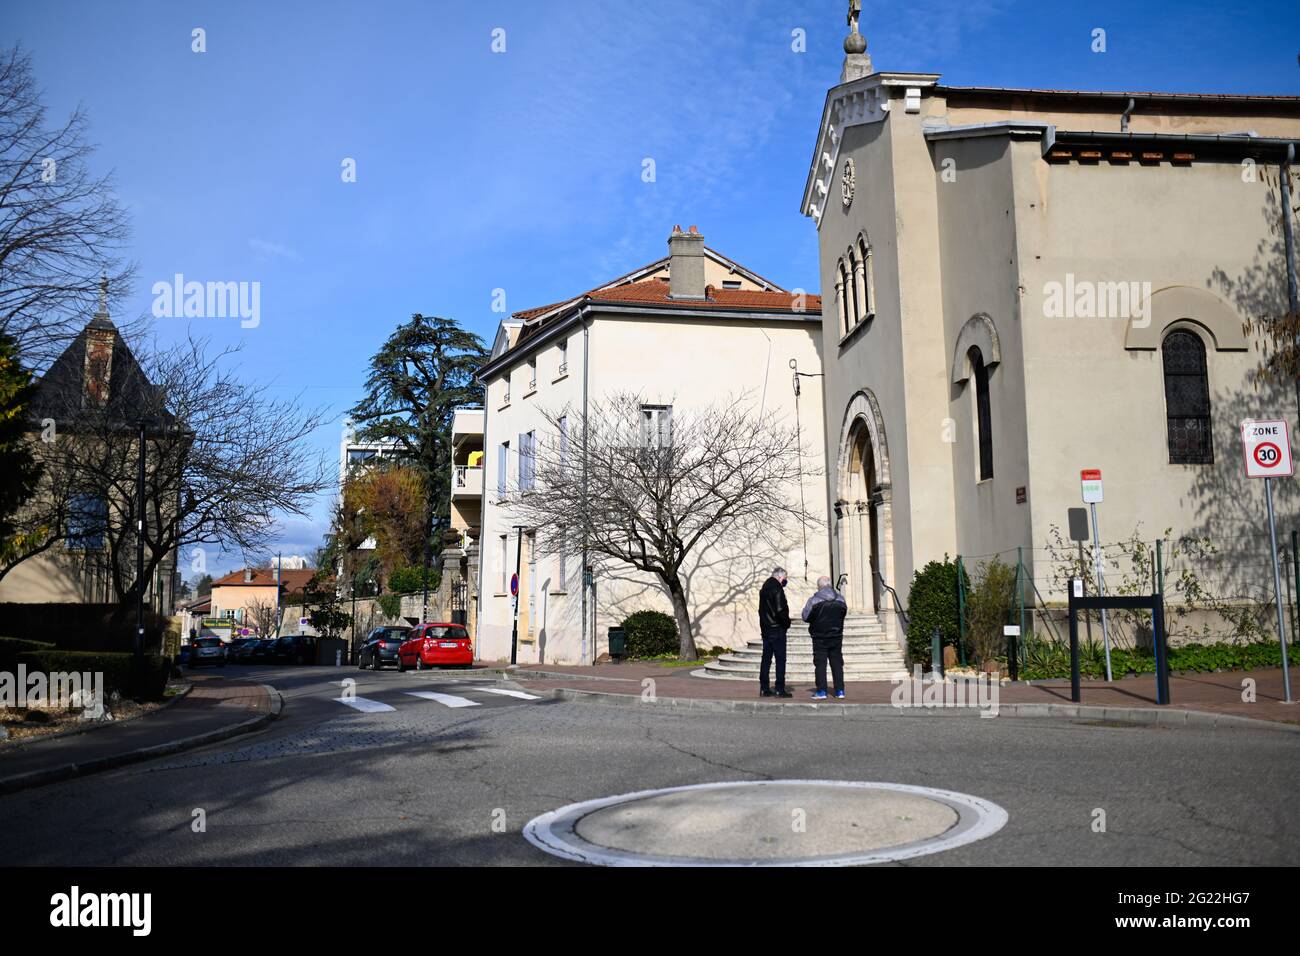 Saint Priest (south eastern France): town center of church of the village of Saint Priest Stock Photo